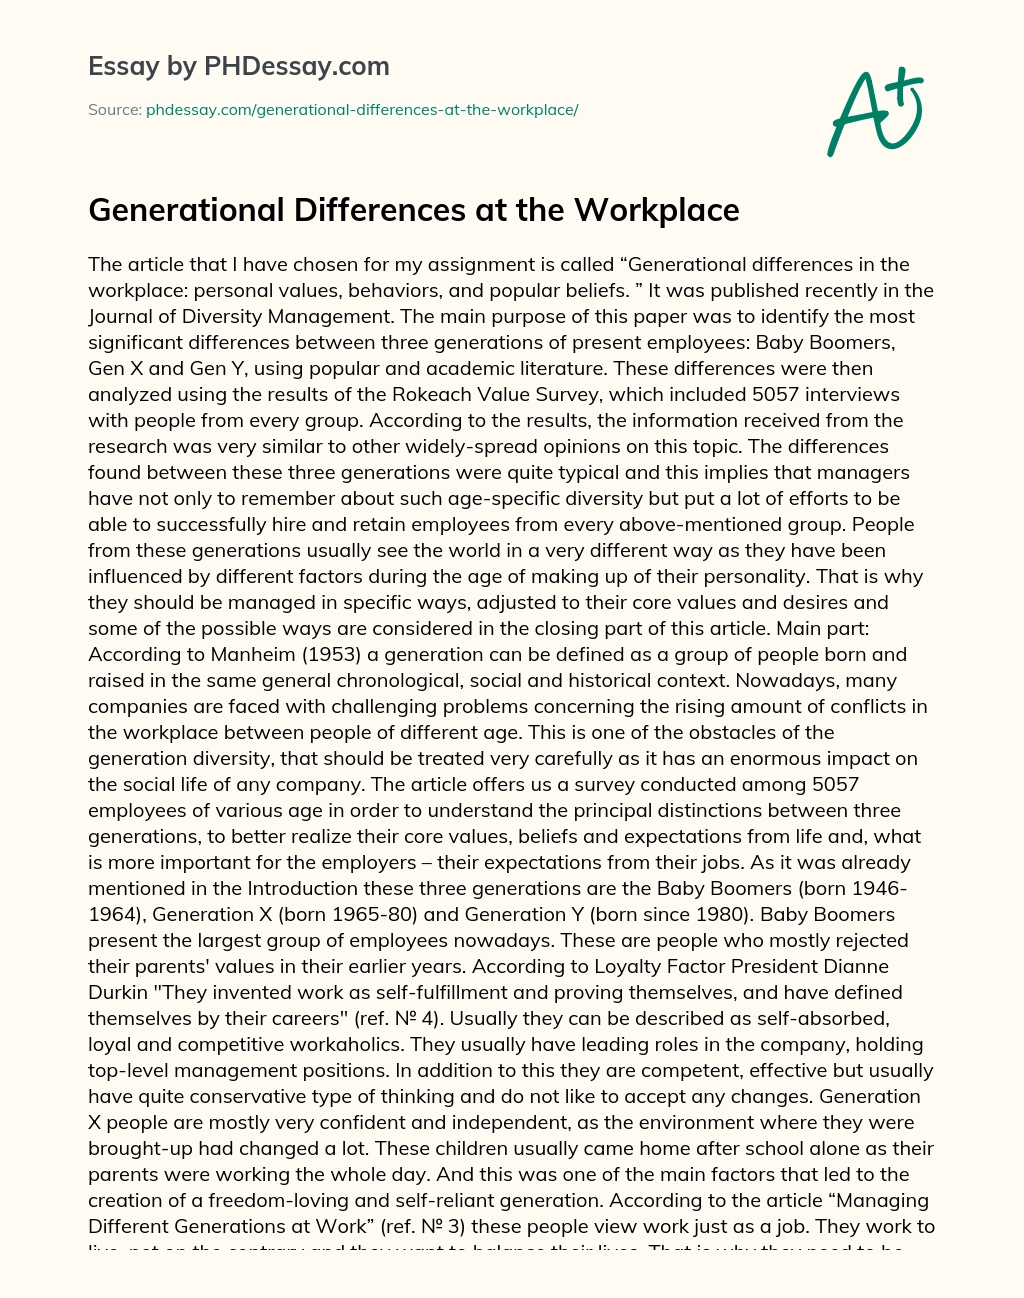 Generational Differences at the Workplace essay